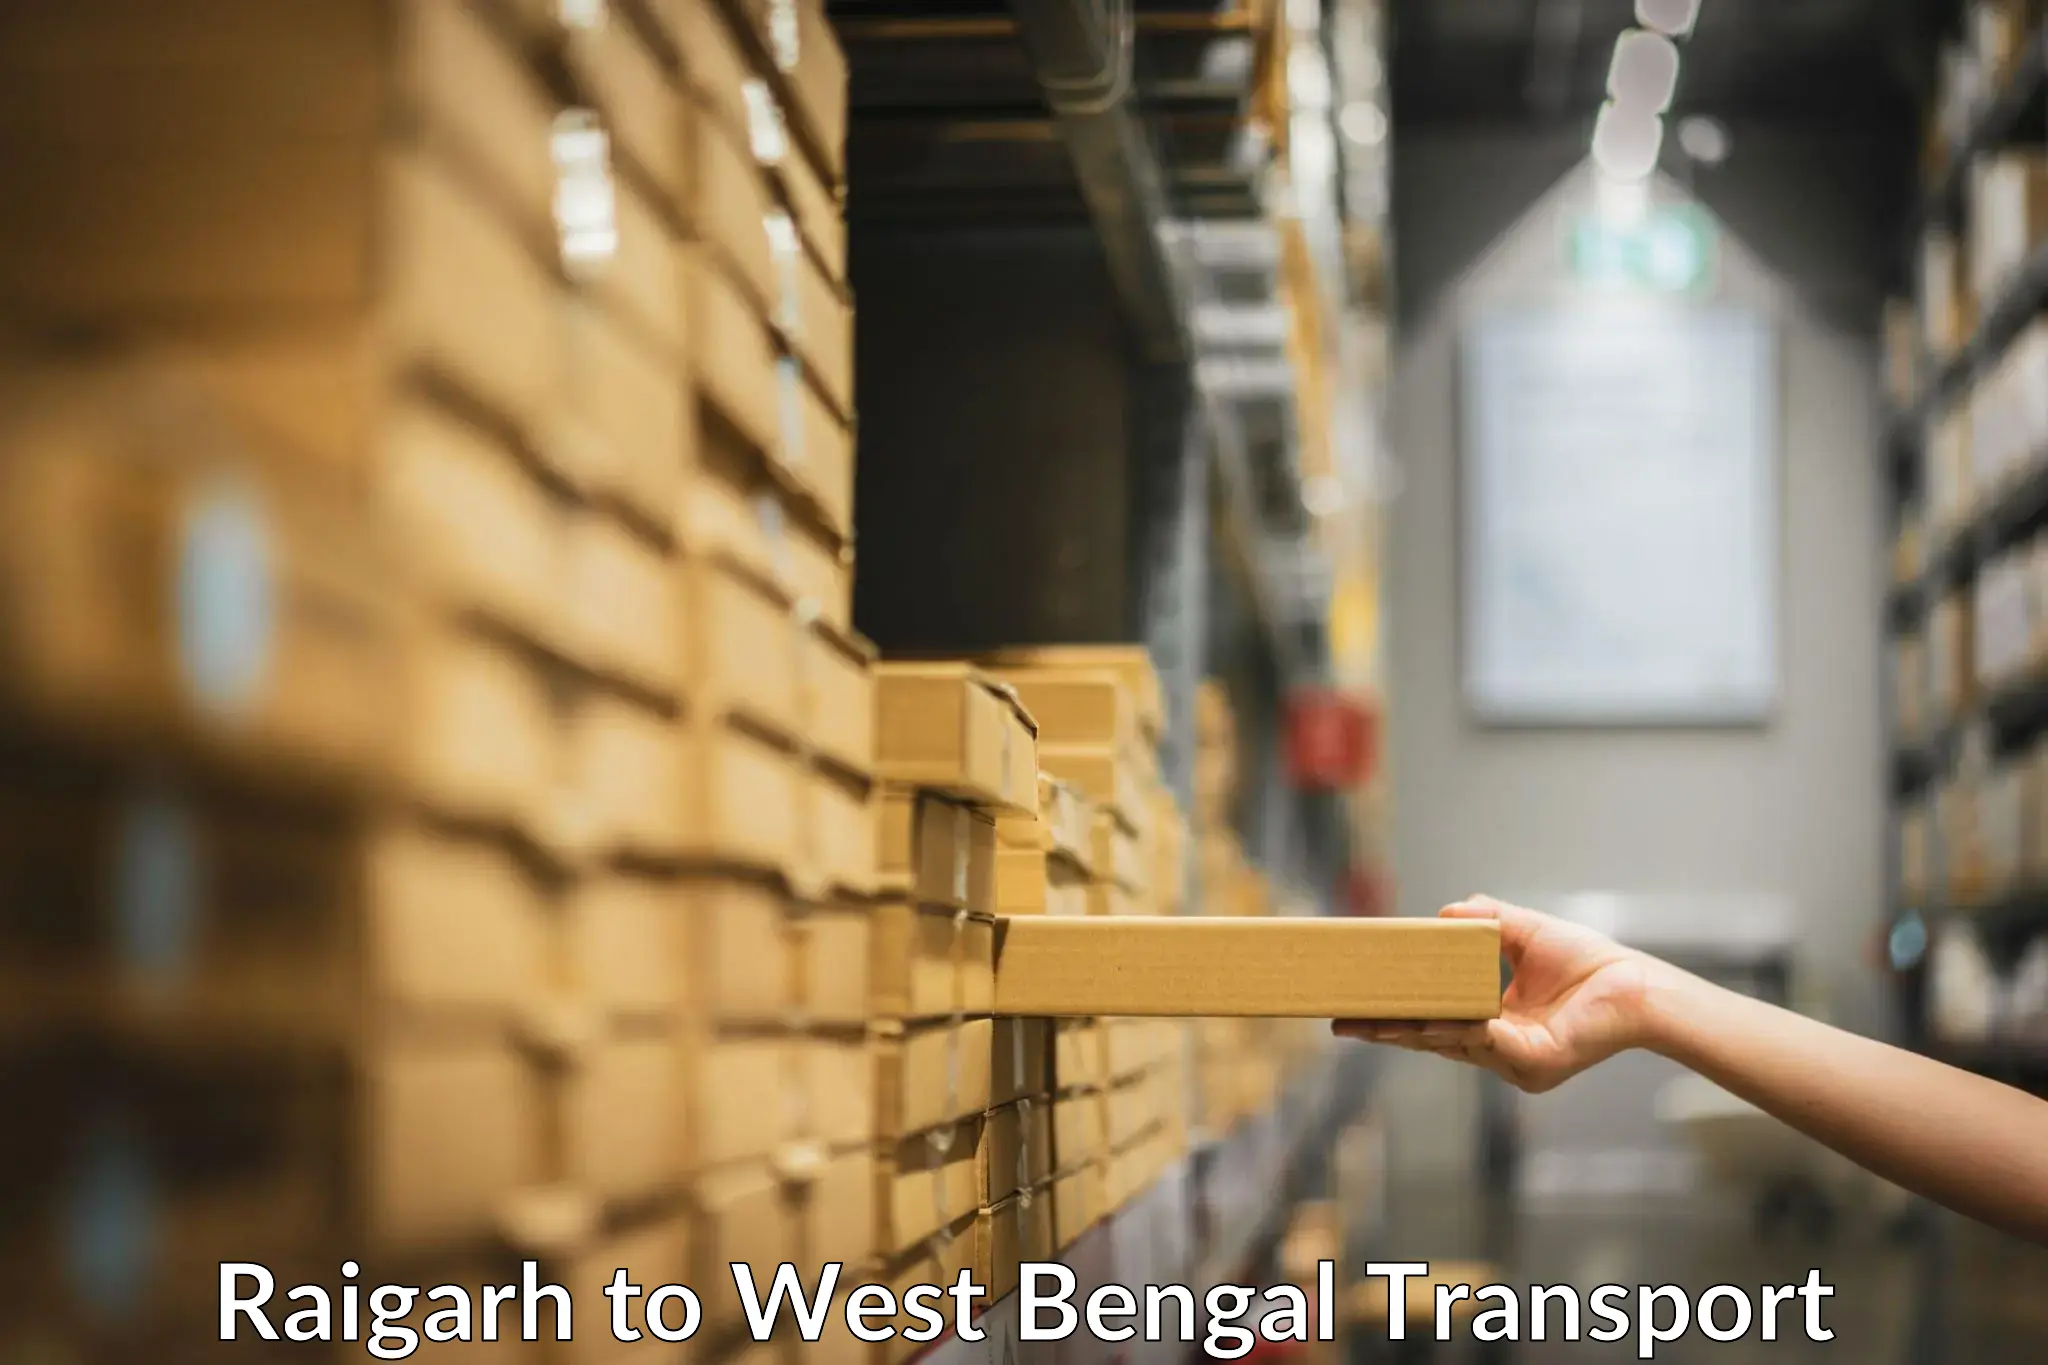 Lorry transport service Raigarh to West Bengal